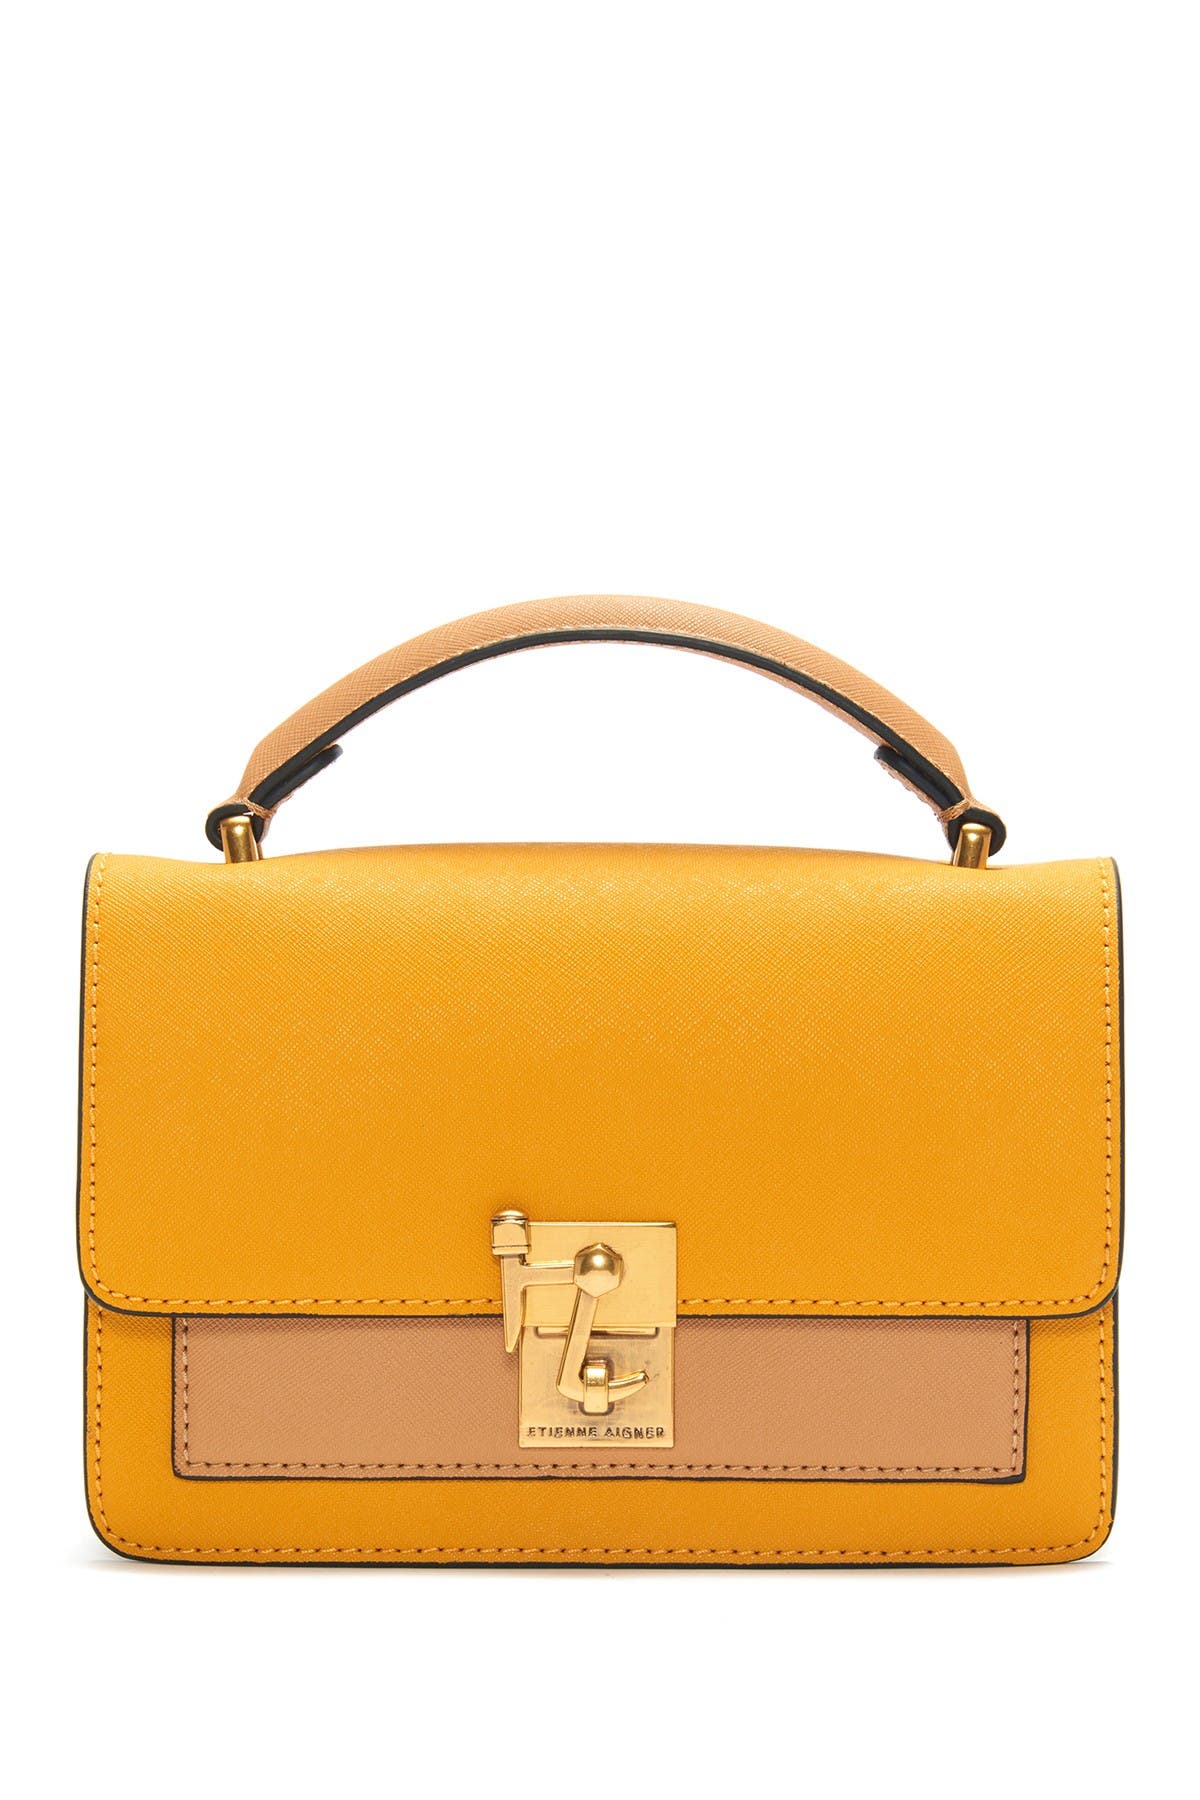 Etienne Aigner Leah Leather Crossbody In Mango Mojito/biscuit